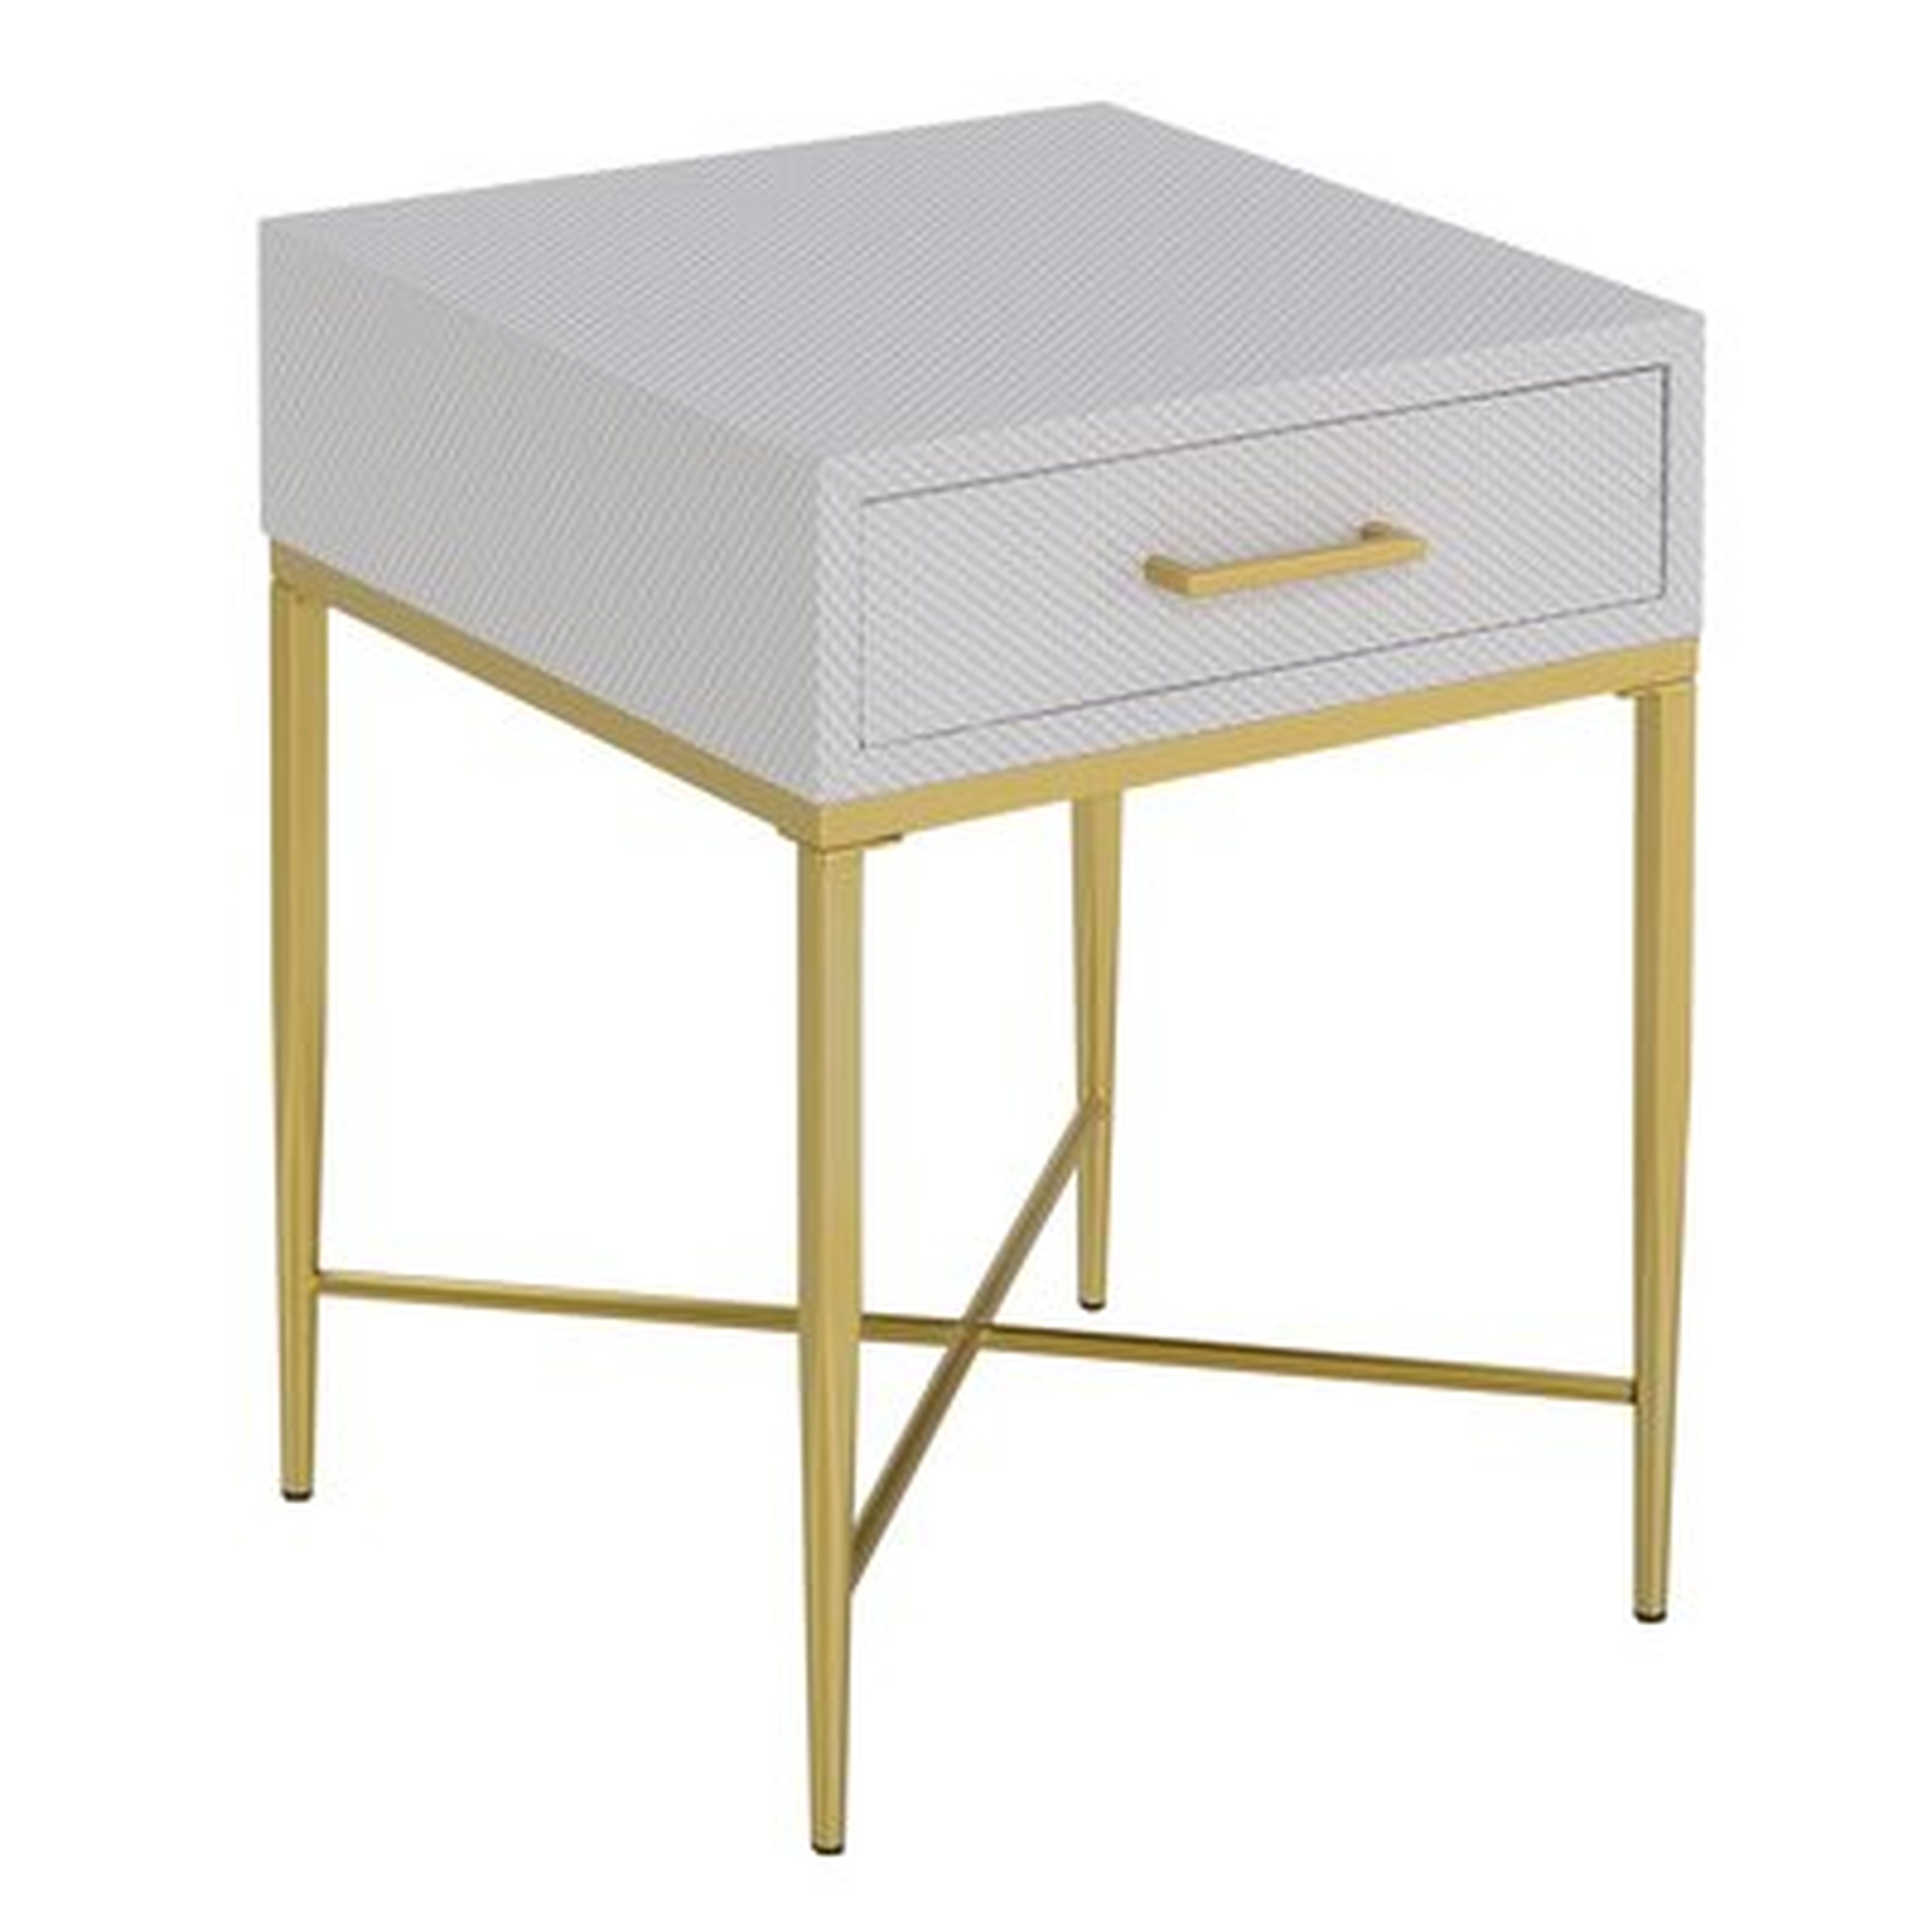 Hesson Cross Legs End Table with Storage - Wayfair